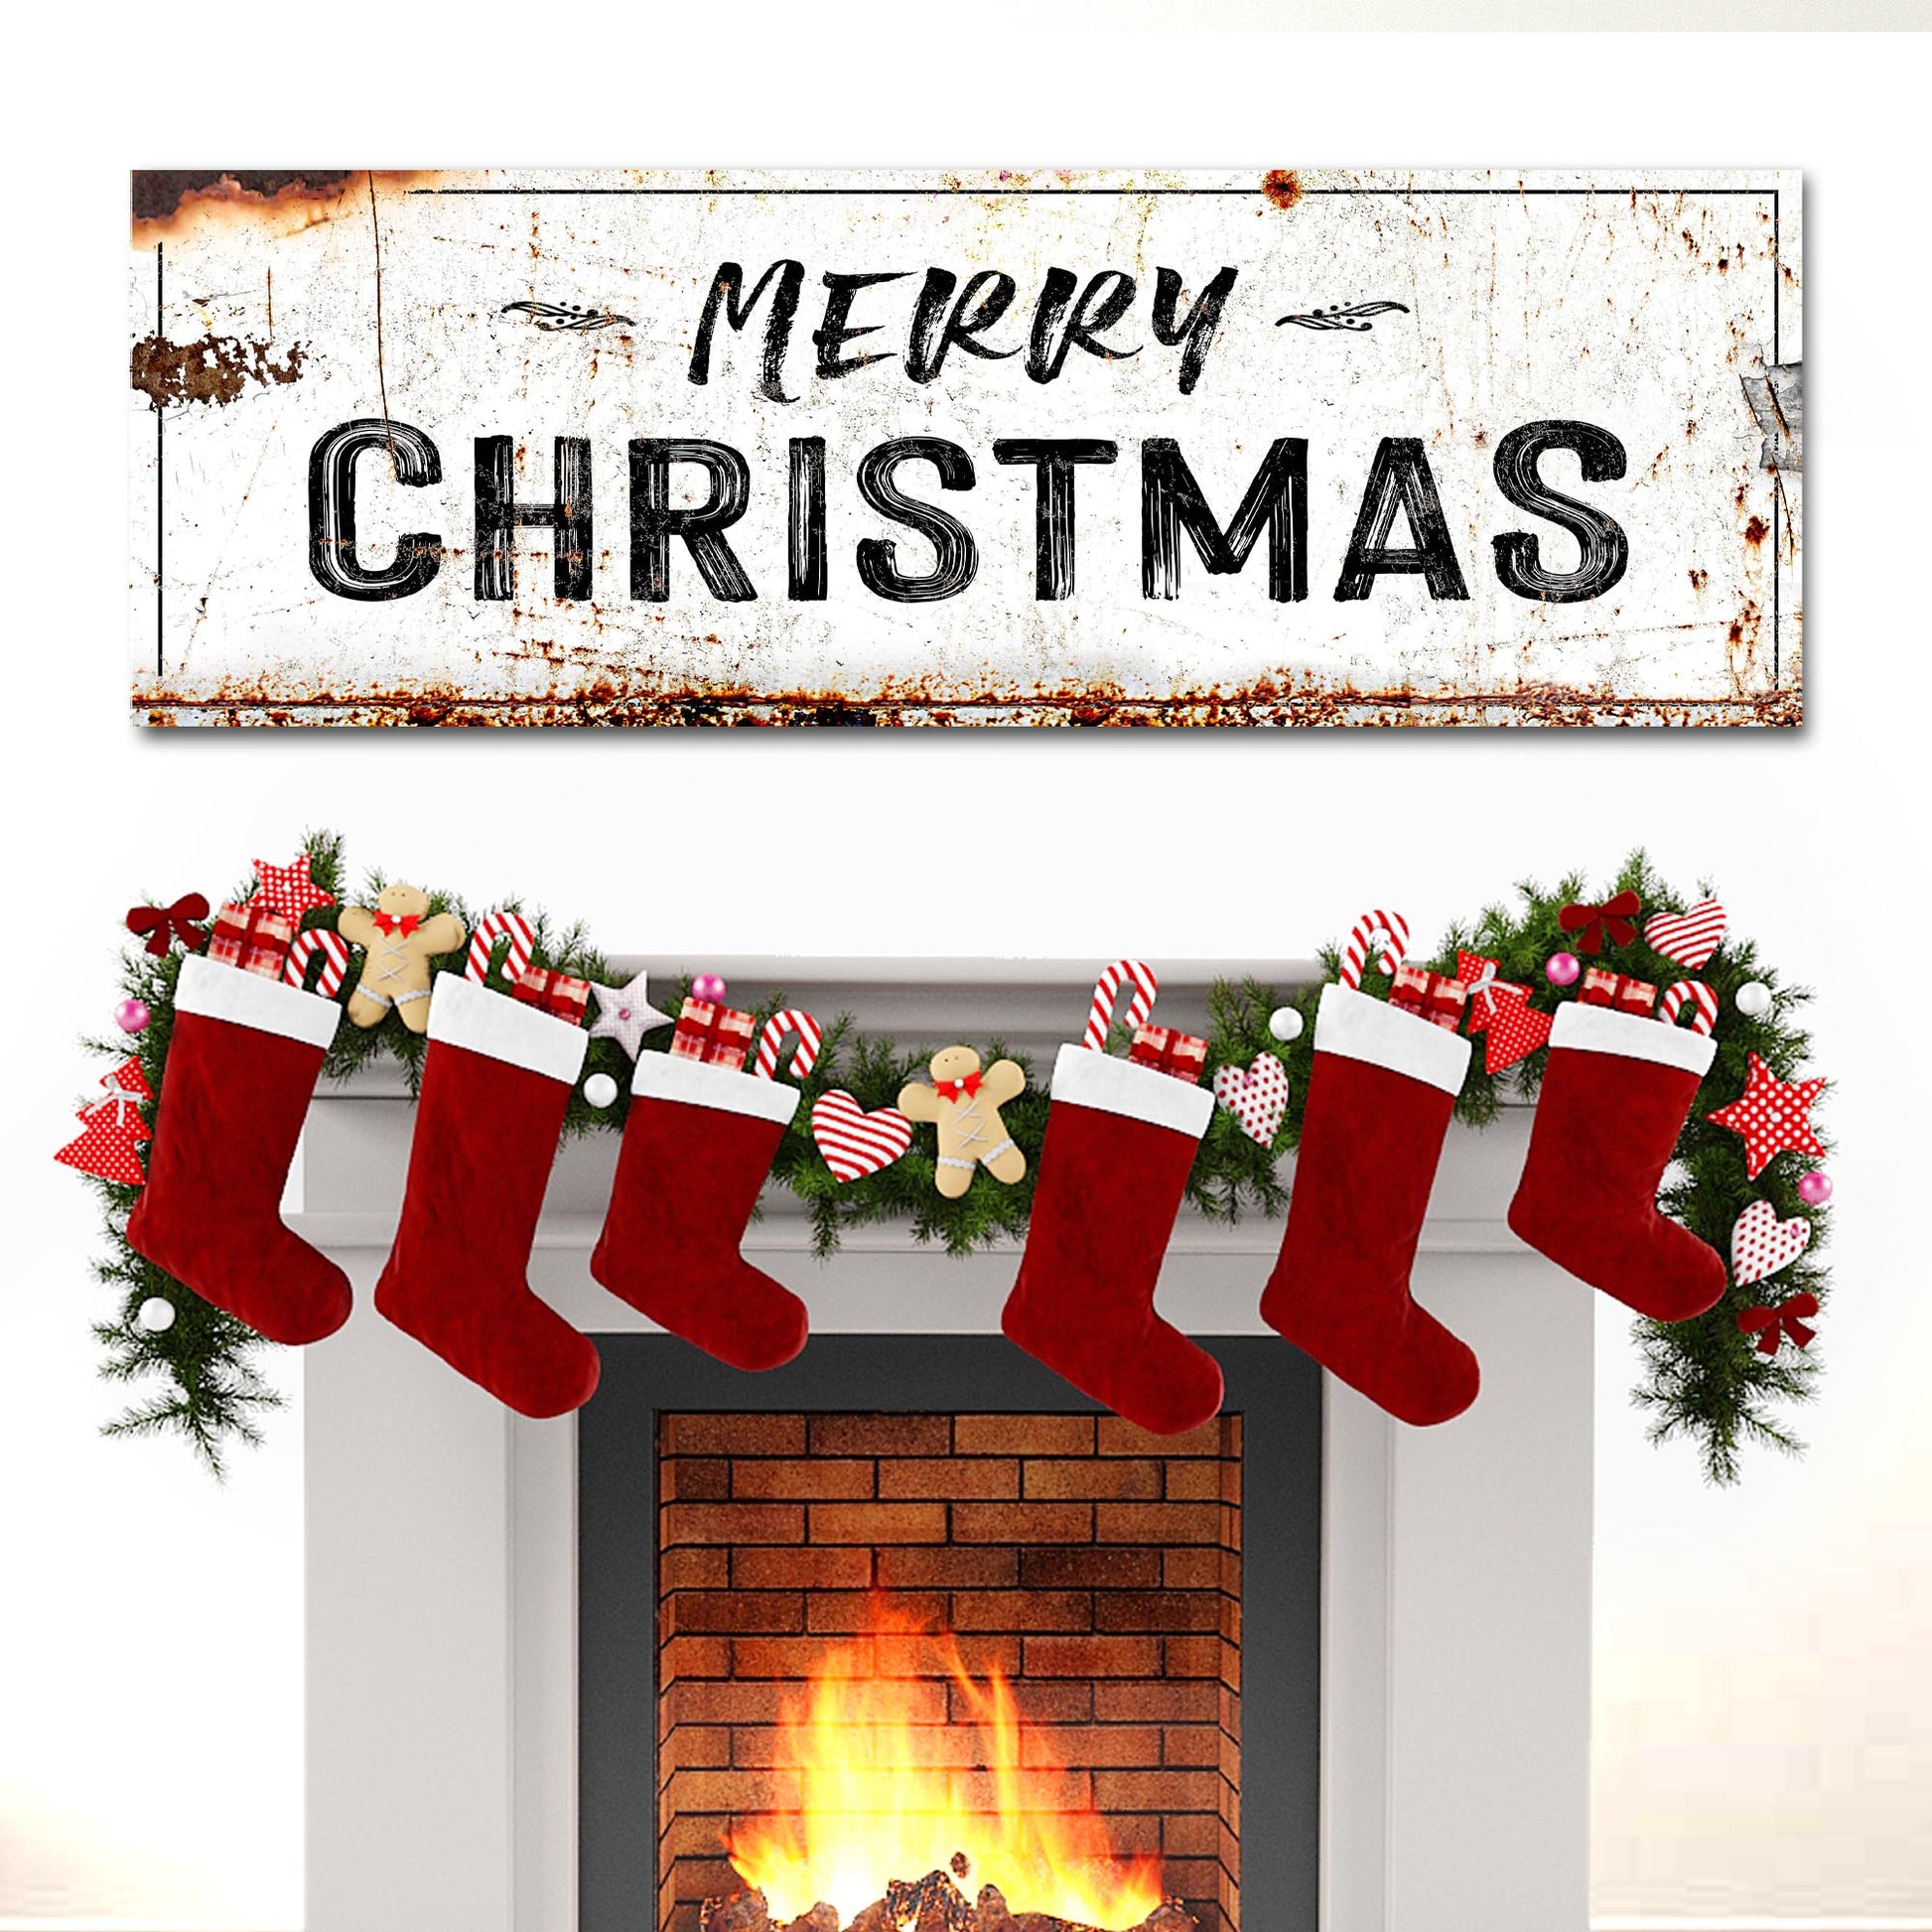 Rustic Merry Christmas Sign - Image by Tailored Canvases